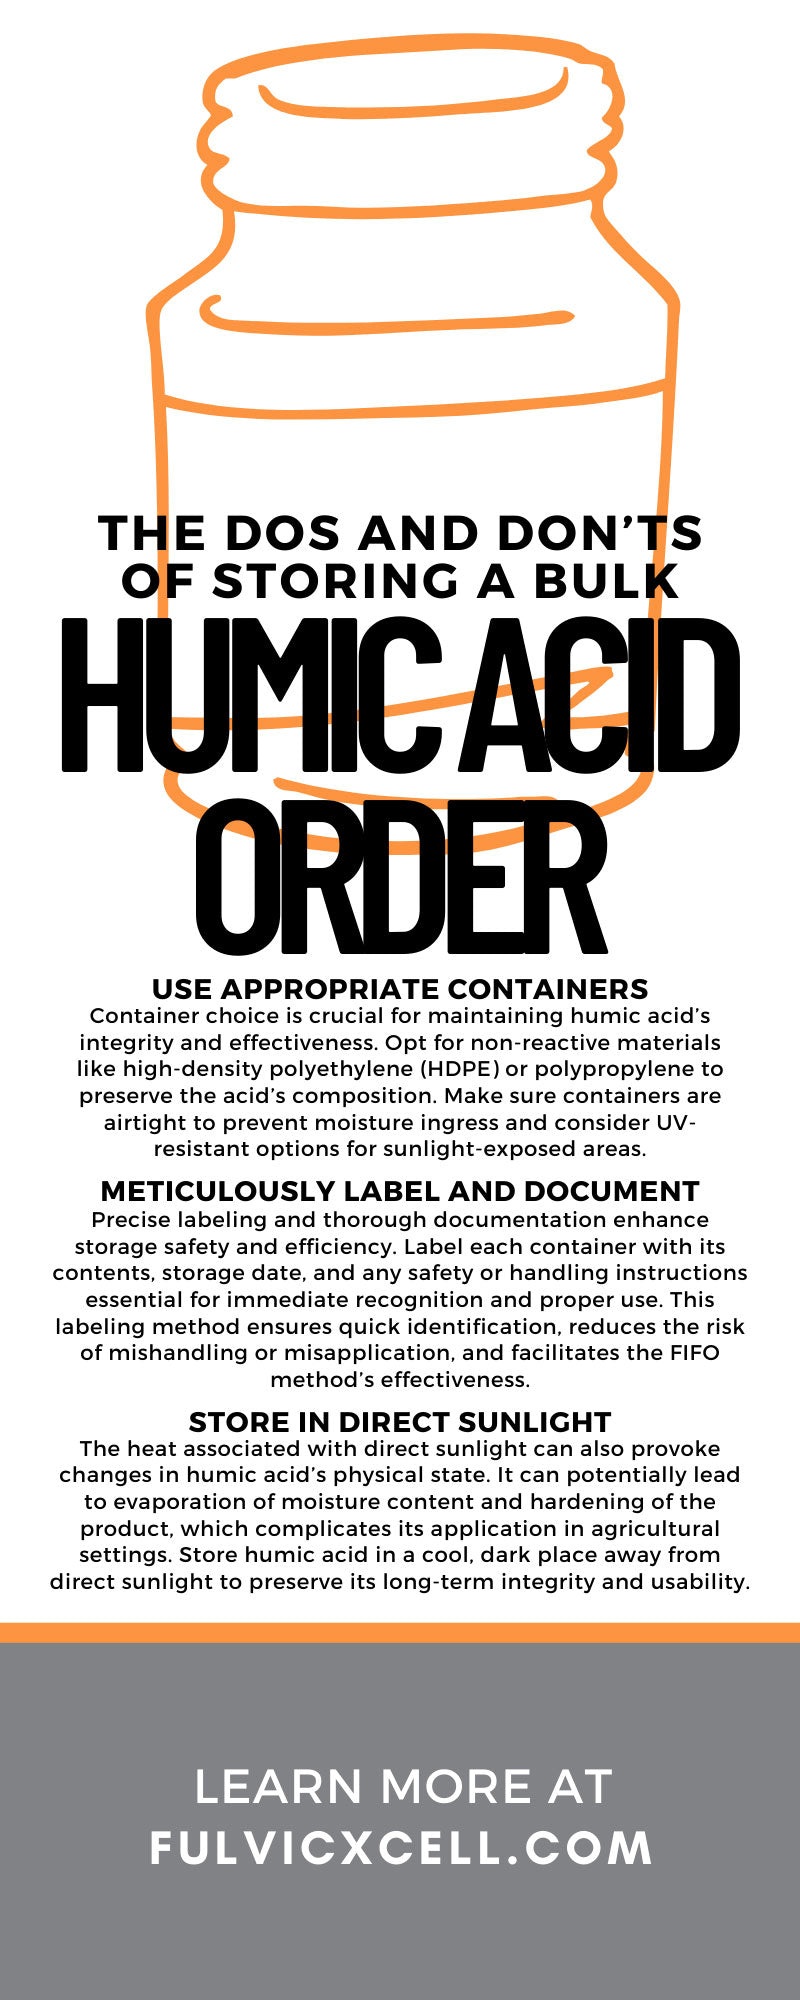 The Dos and Don’ts of Storing a Bulk Humic Acid Order